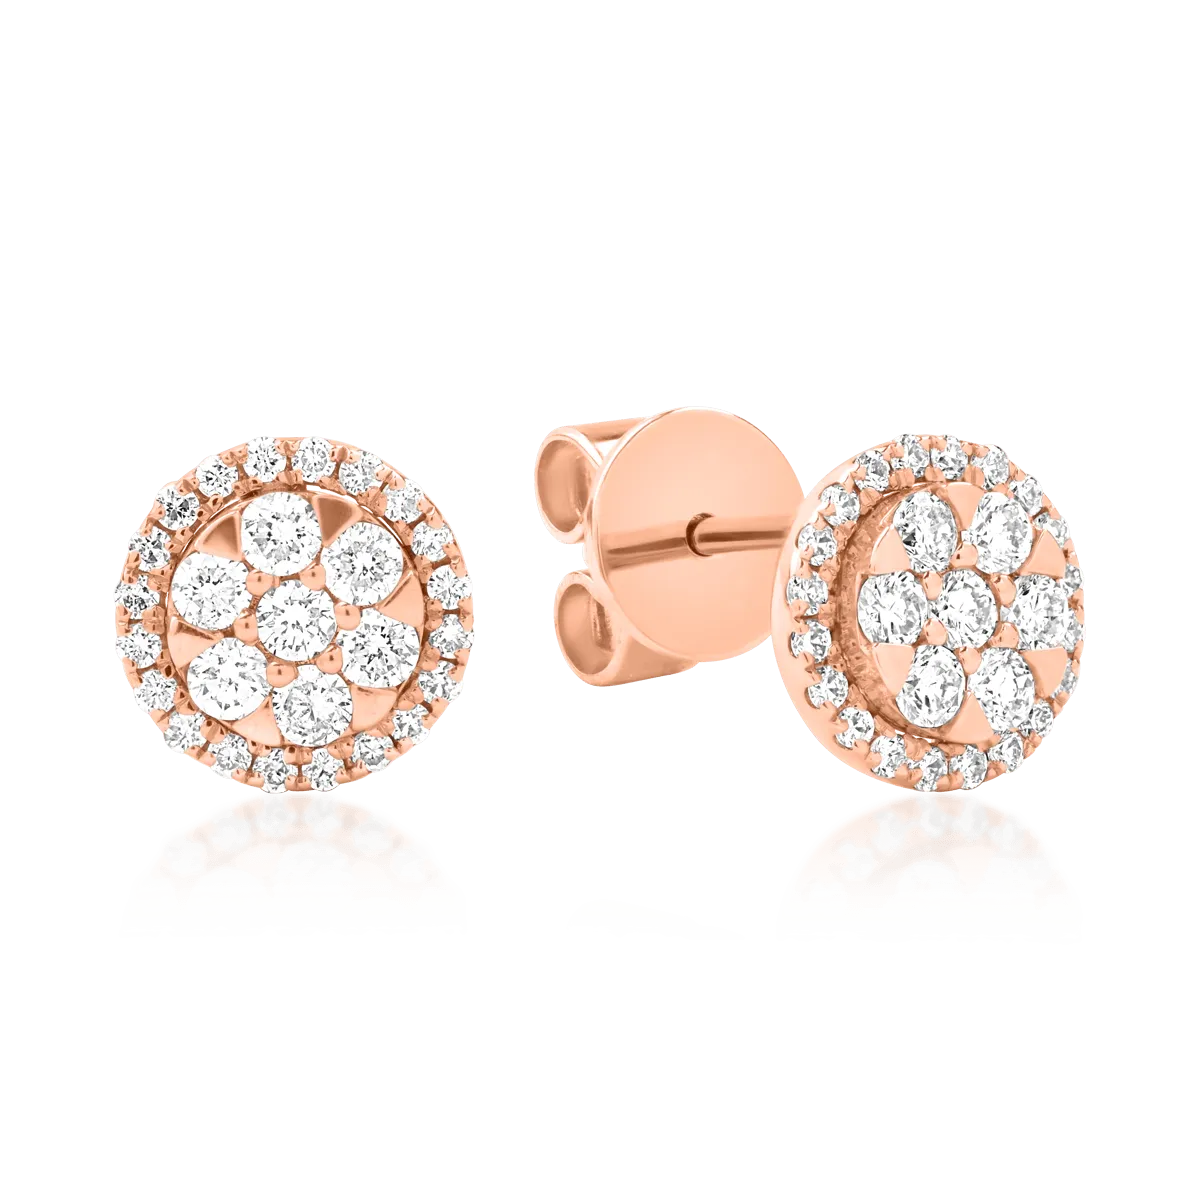 14K rose gold earrings with 0.44ct diamonds